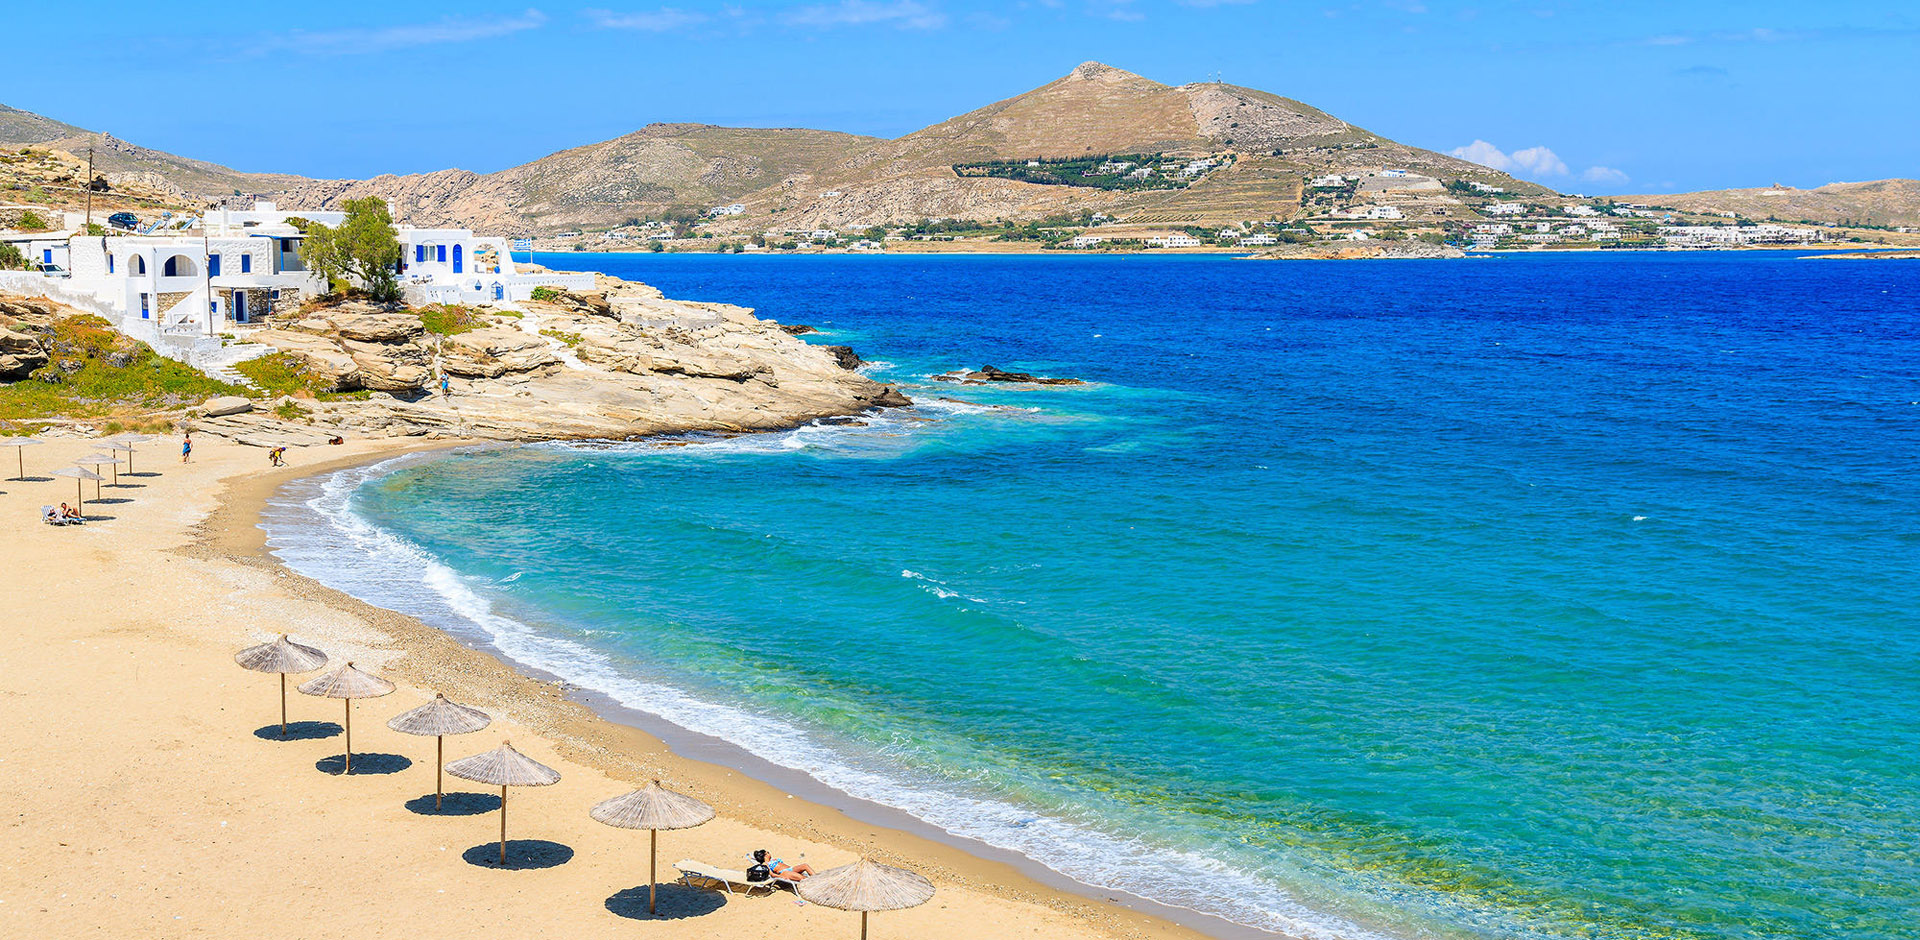 Discover the beauty of Paros